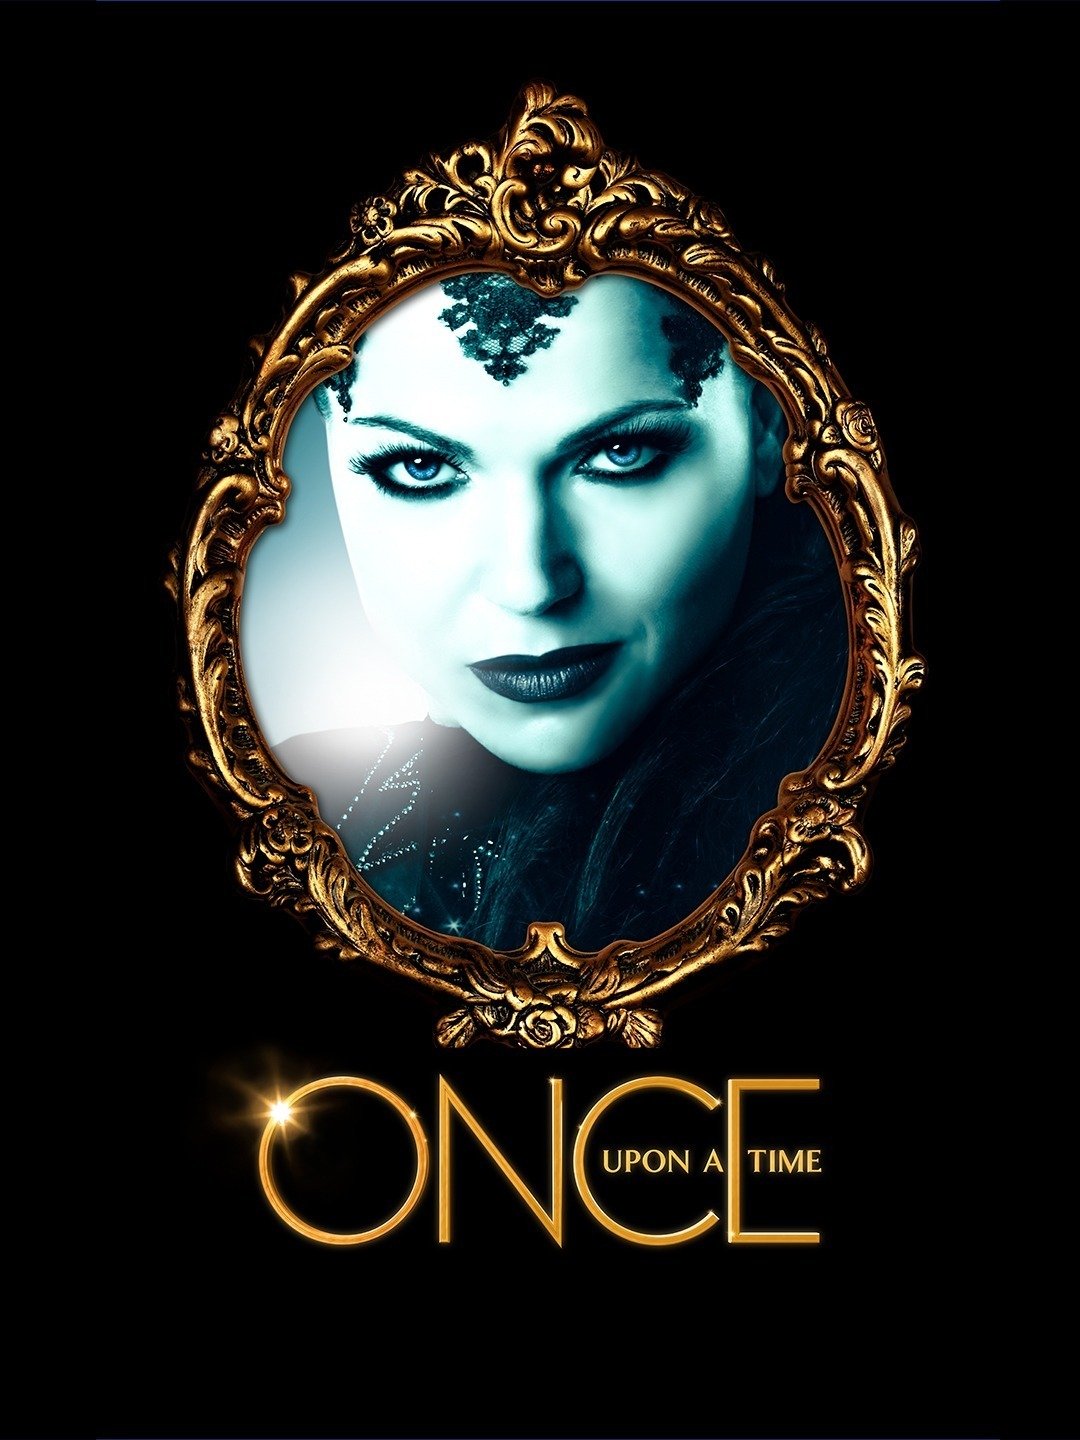 Once Upon A Time Show Font